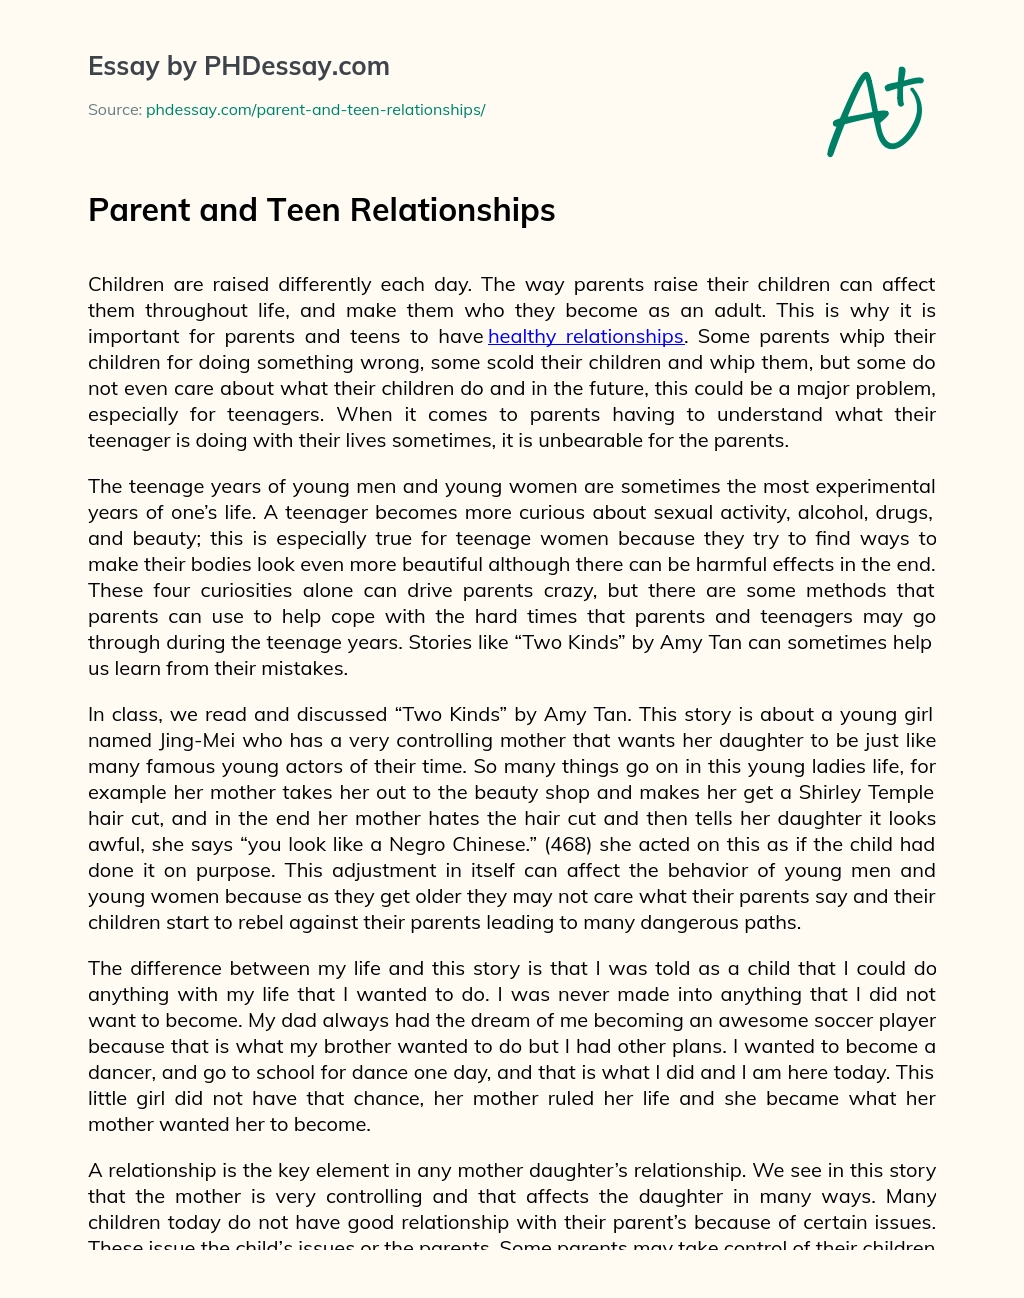 Parent and Teen Relationships essay